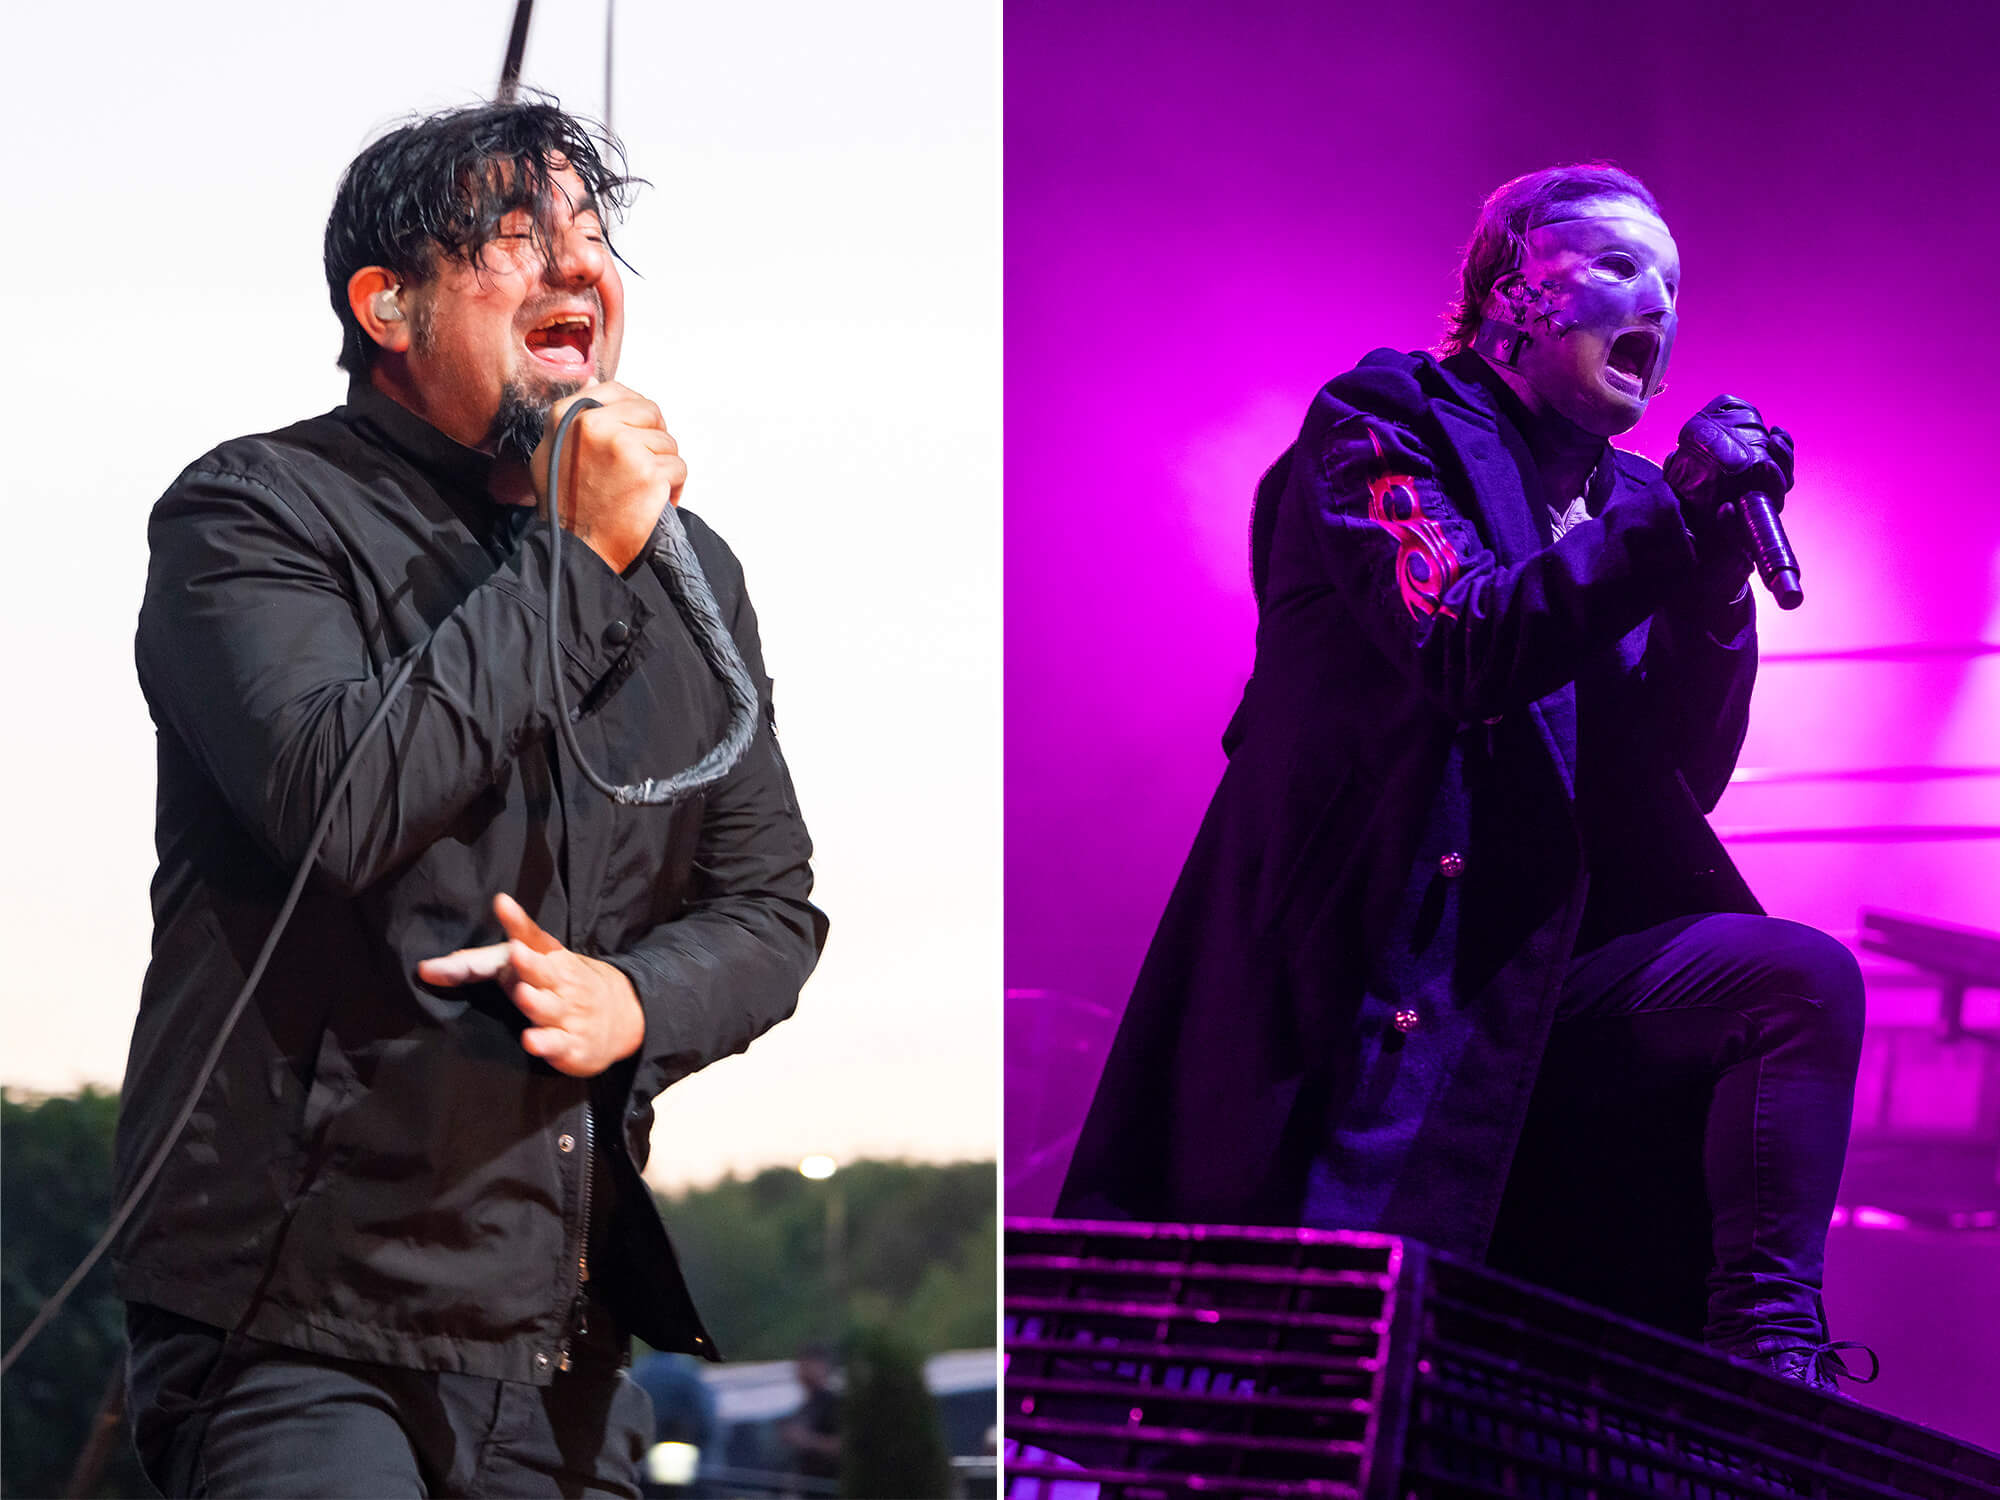 Chino Moreno (left) singing into a mic and Corey Taylor (right) pictured in his Slipknot mask